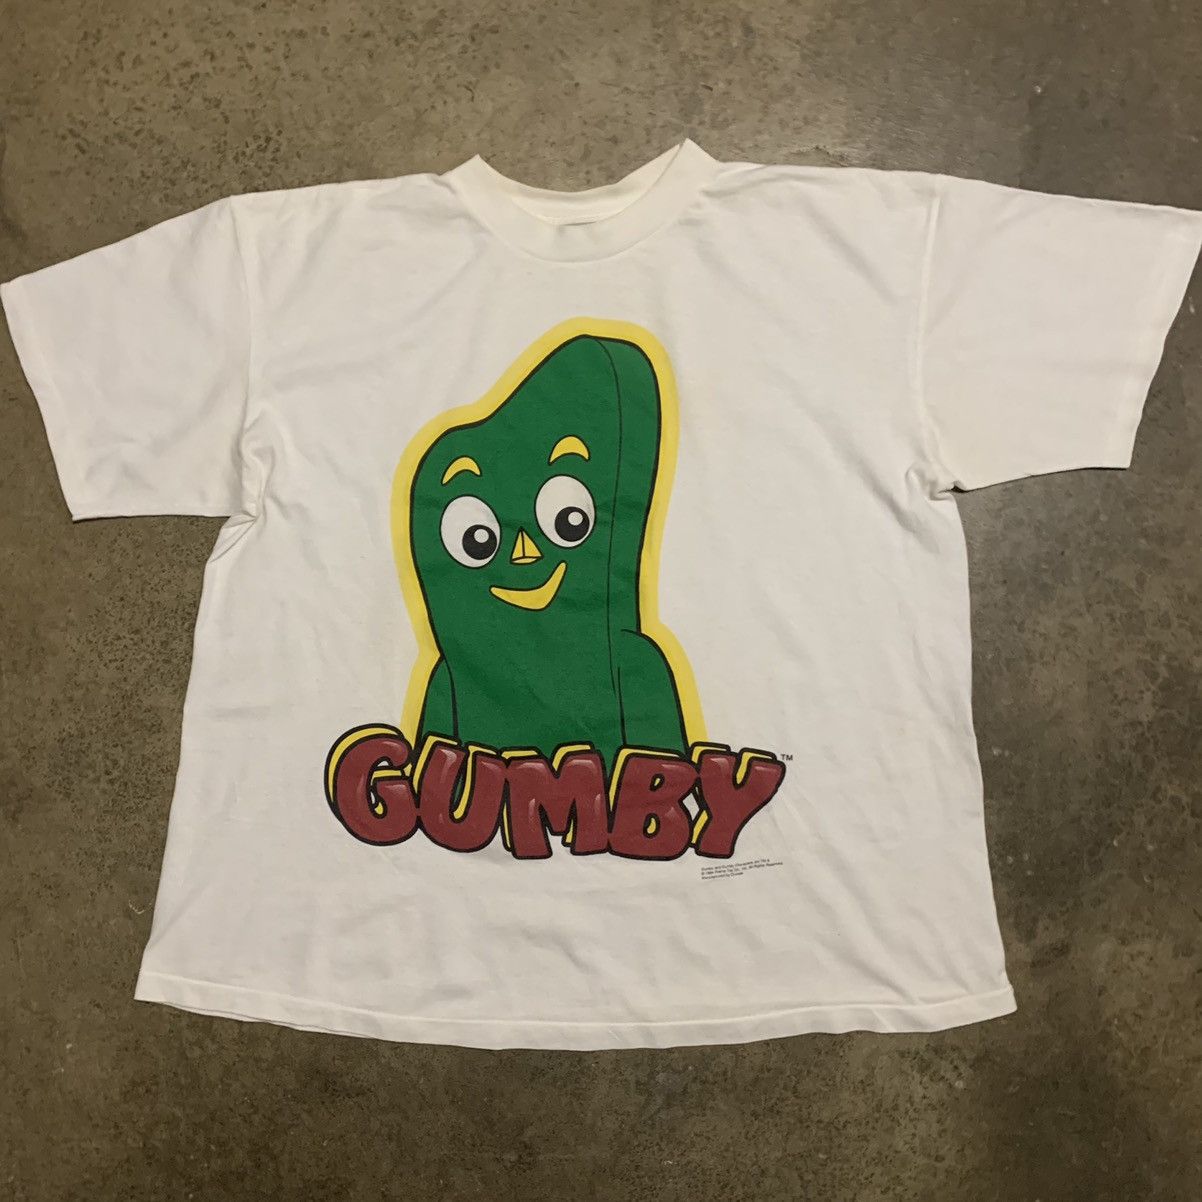 Vintage 1994 Gumby Graphic Tee Shirt | Grailed